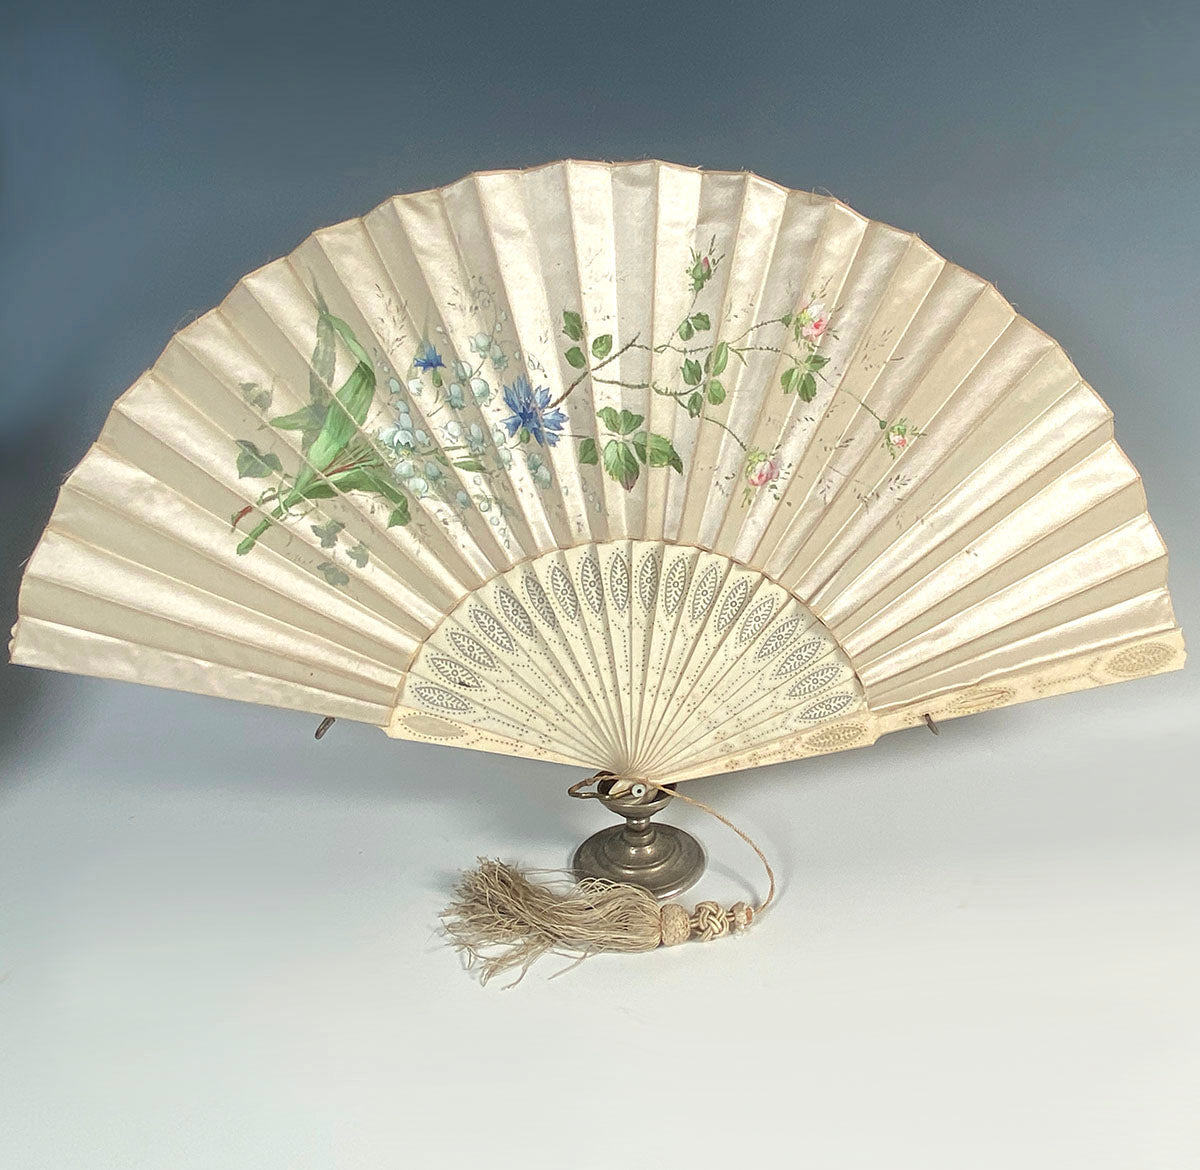 Antique French Hand Painted Silk 27cm Fan, Carved Bone Guard and Sticks, Silk Tassel